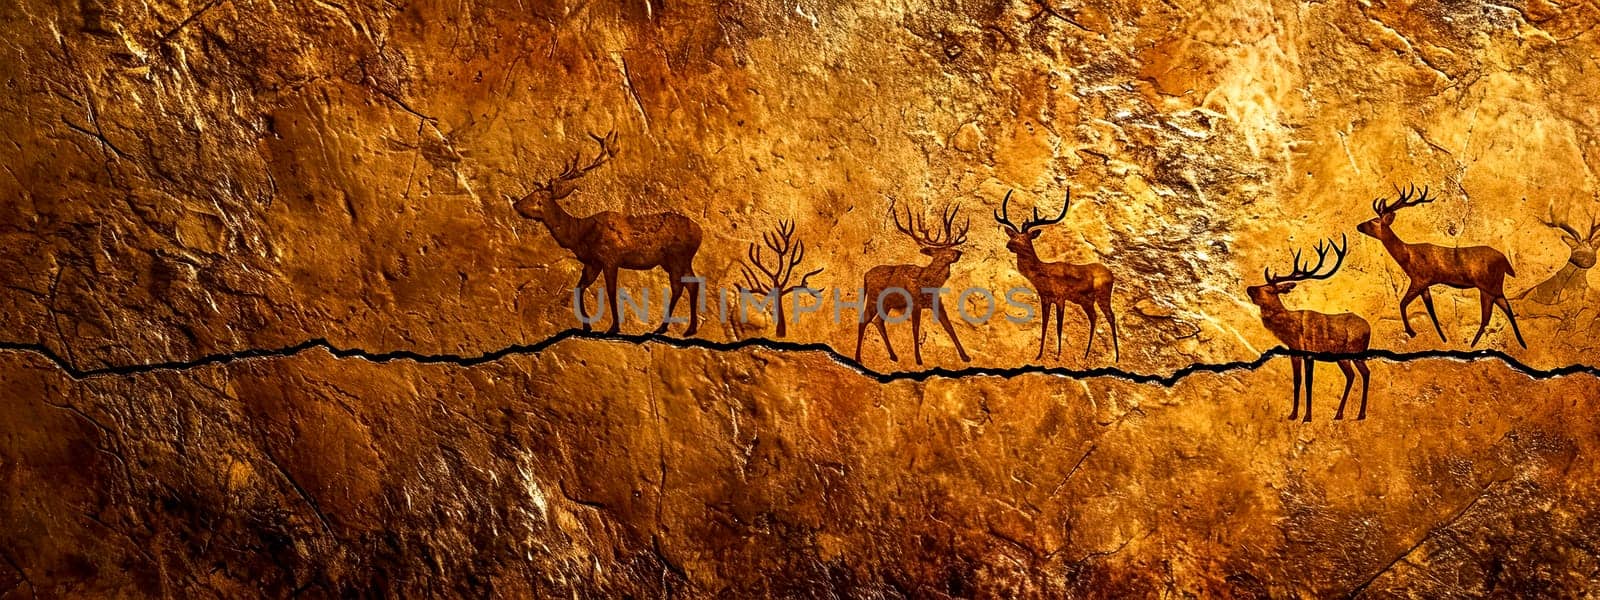 Prehistoric cave painting style illustration of a herd of deer by Edophoto